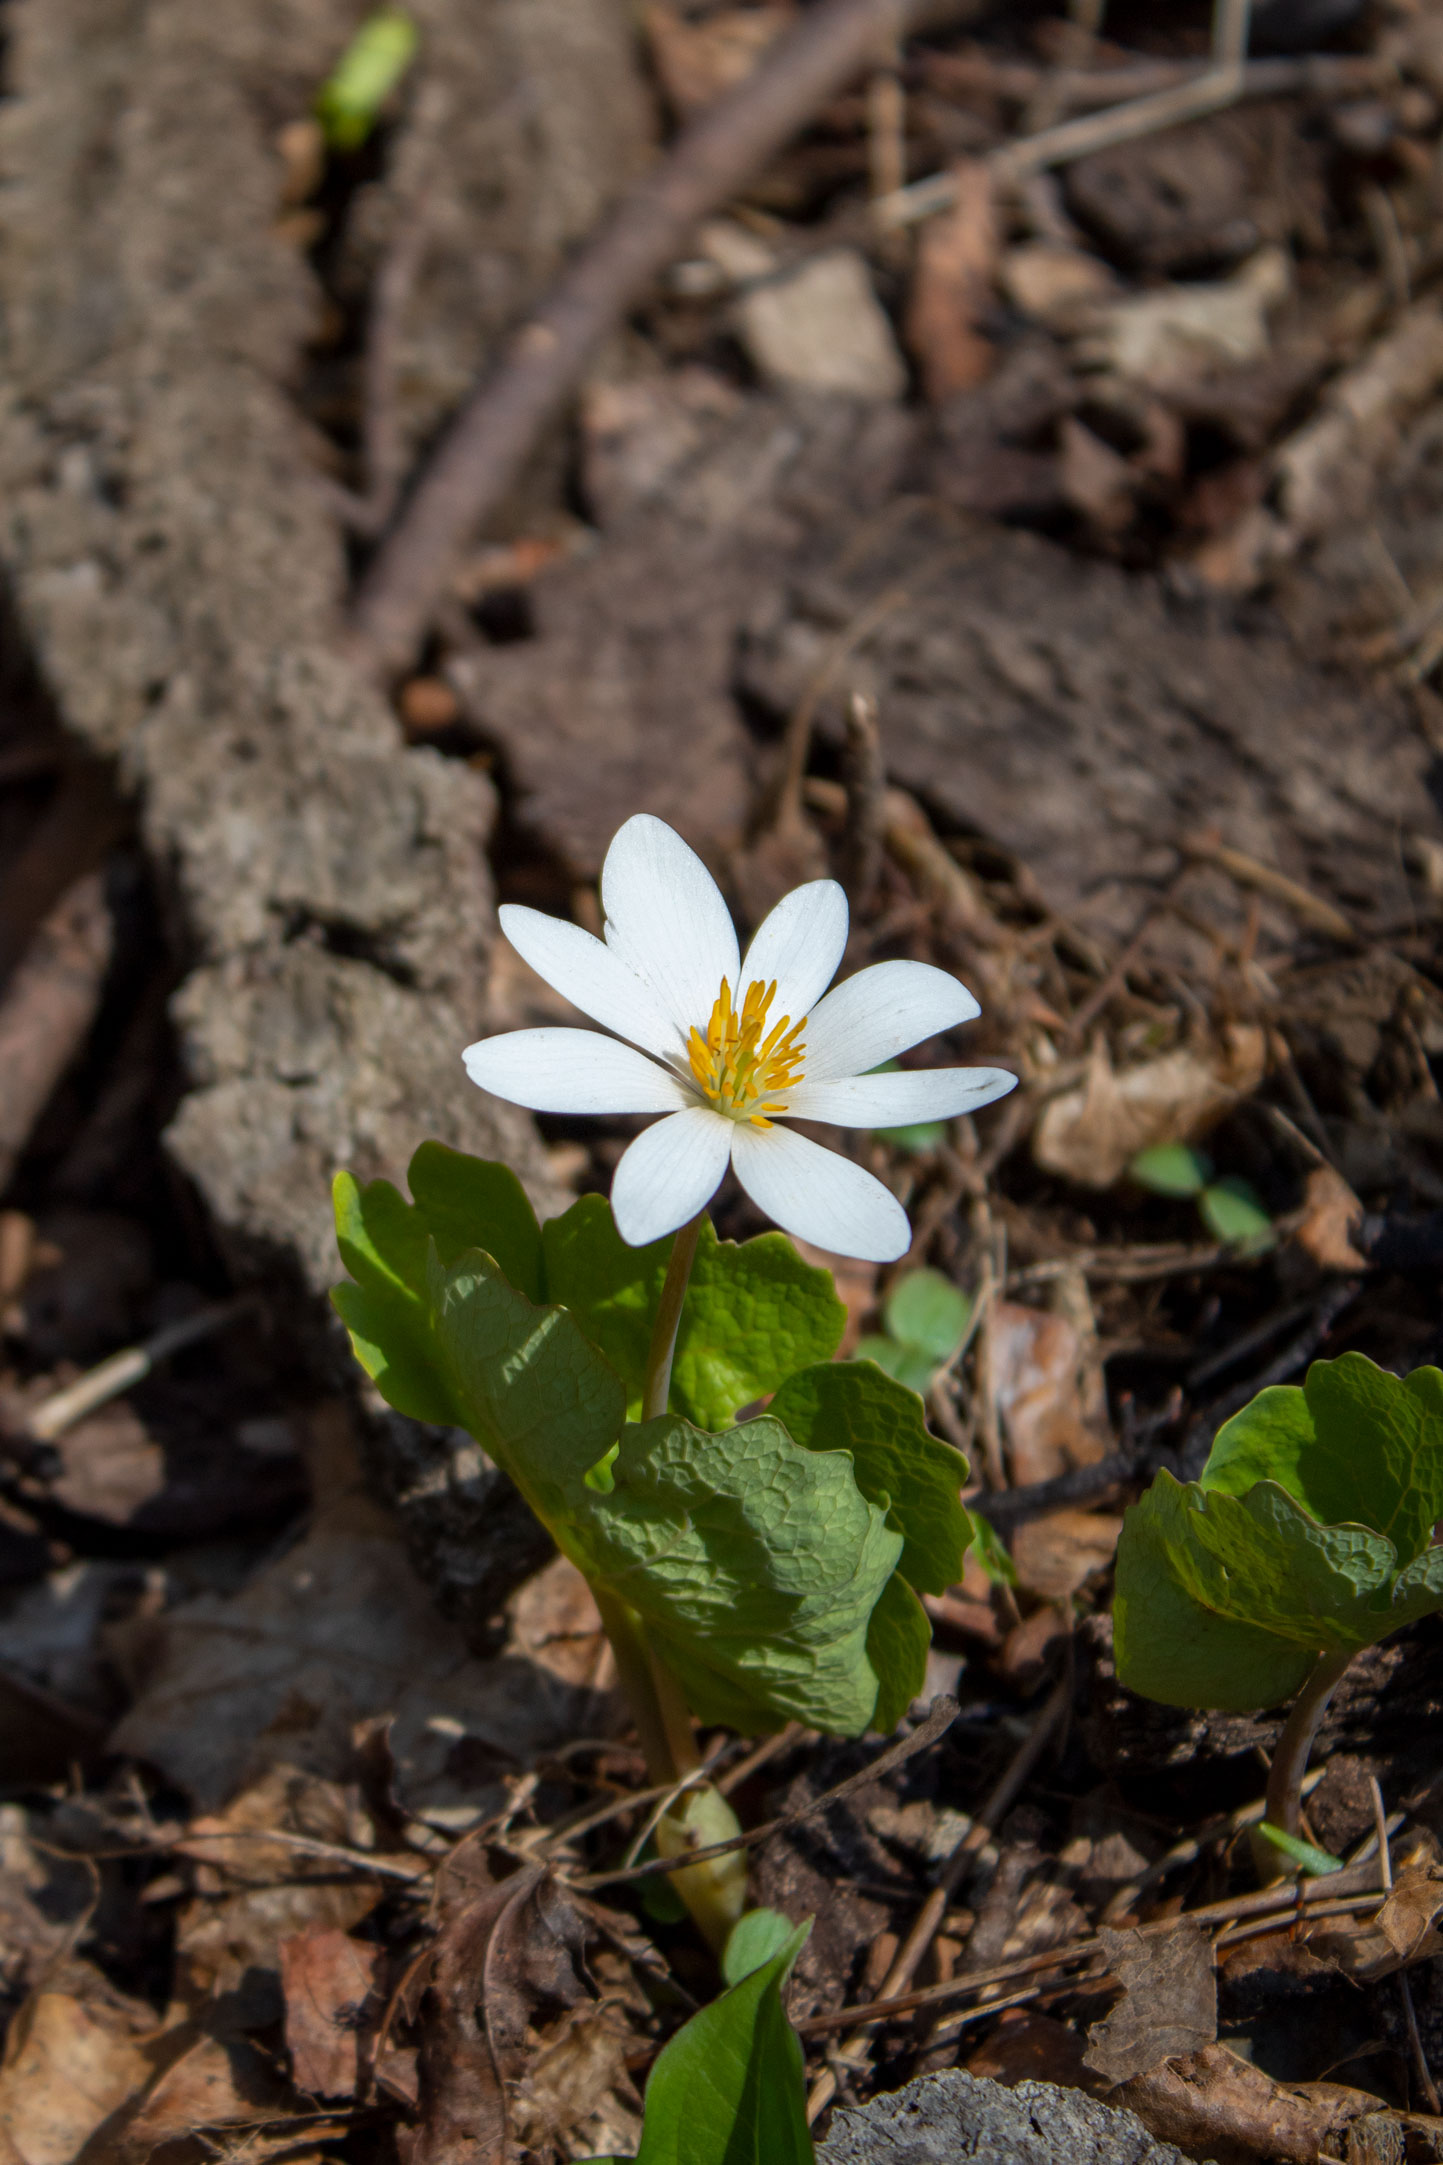 A single white flower (bloodroot) on the forest floor